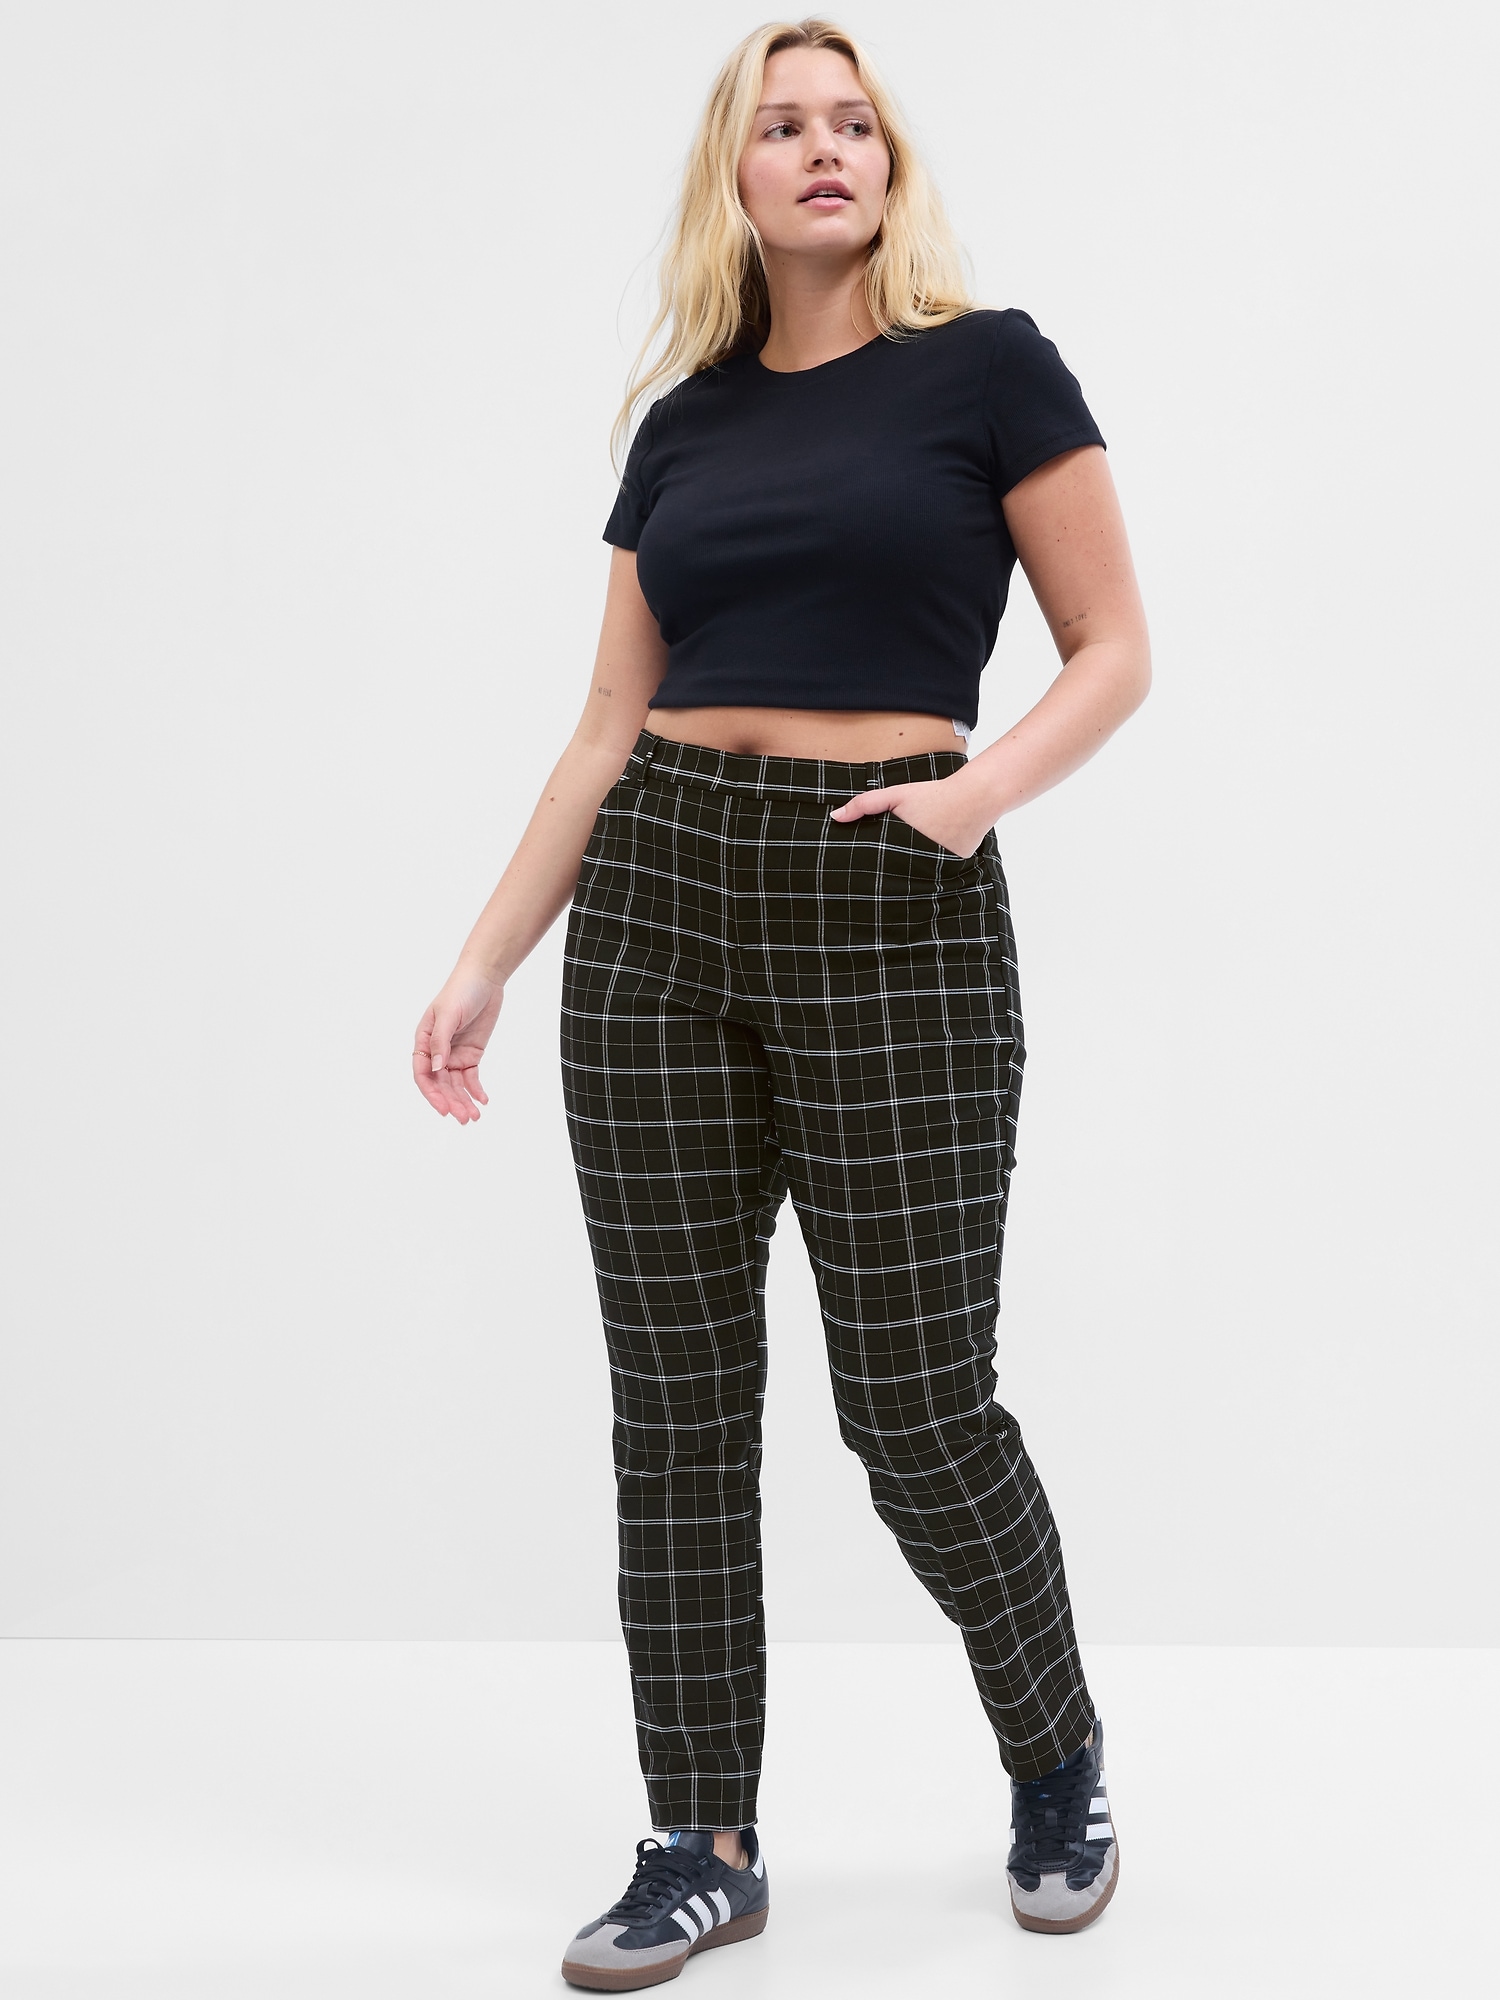 Buy the Womens Black White Check Print Slim Fit Pull-on Ankle Pants Size 14